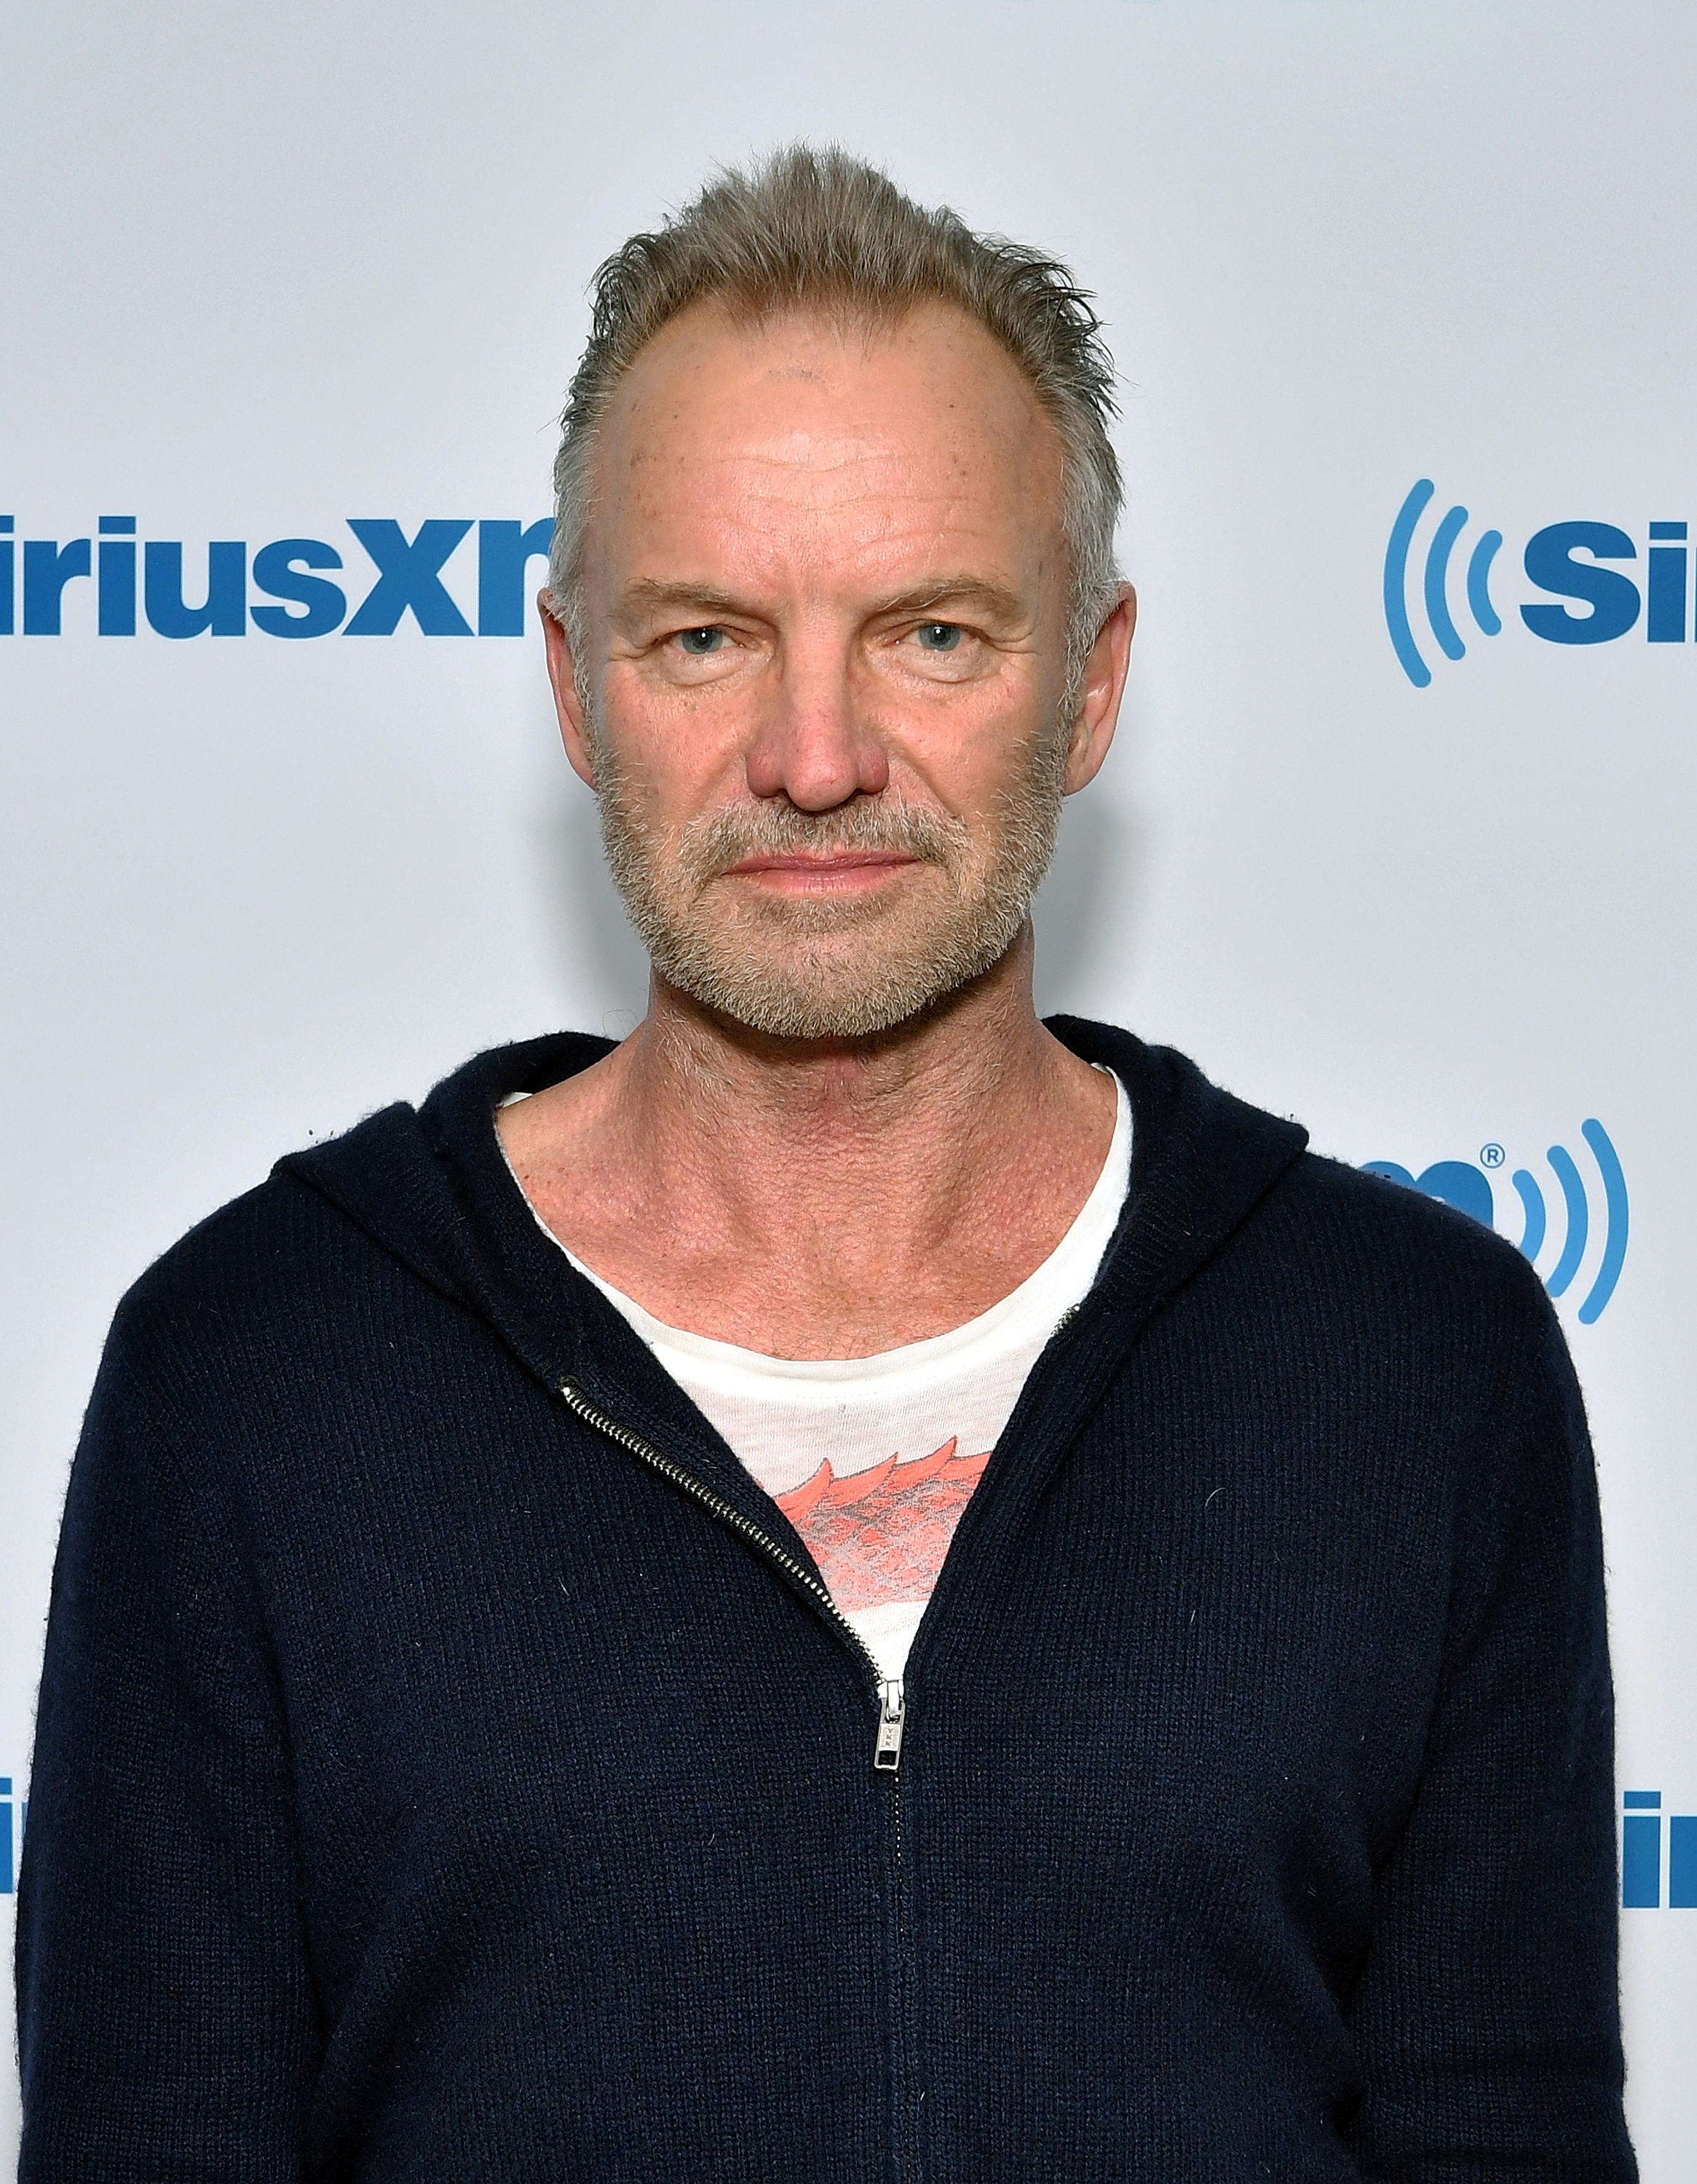 Sting visits SiriusXM Studios on April 29, 2019, in New York City. | Source: Getty Images